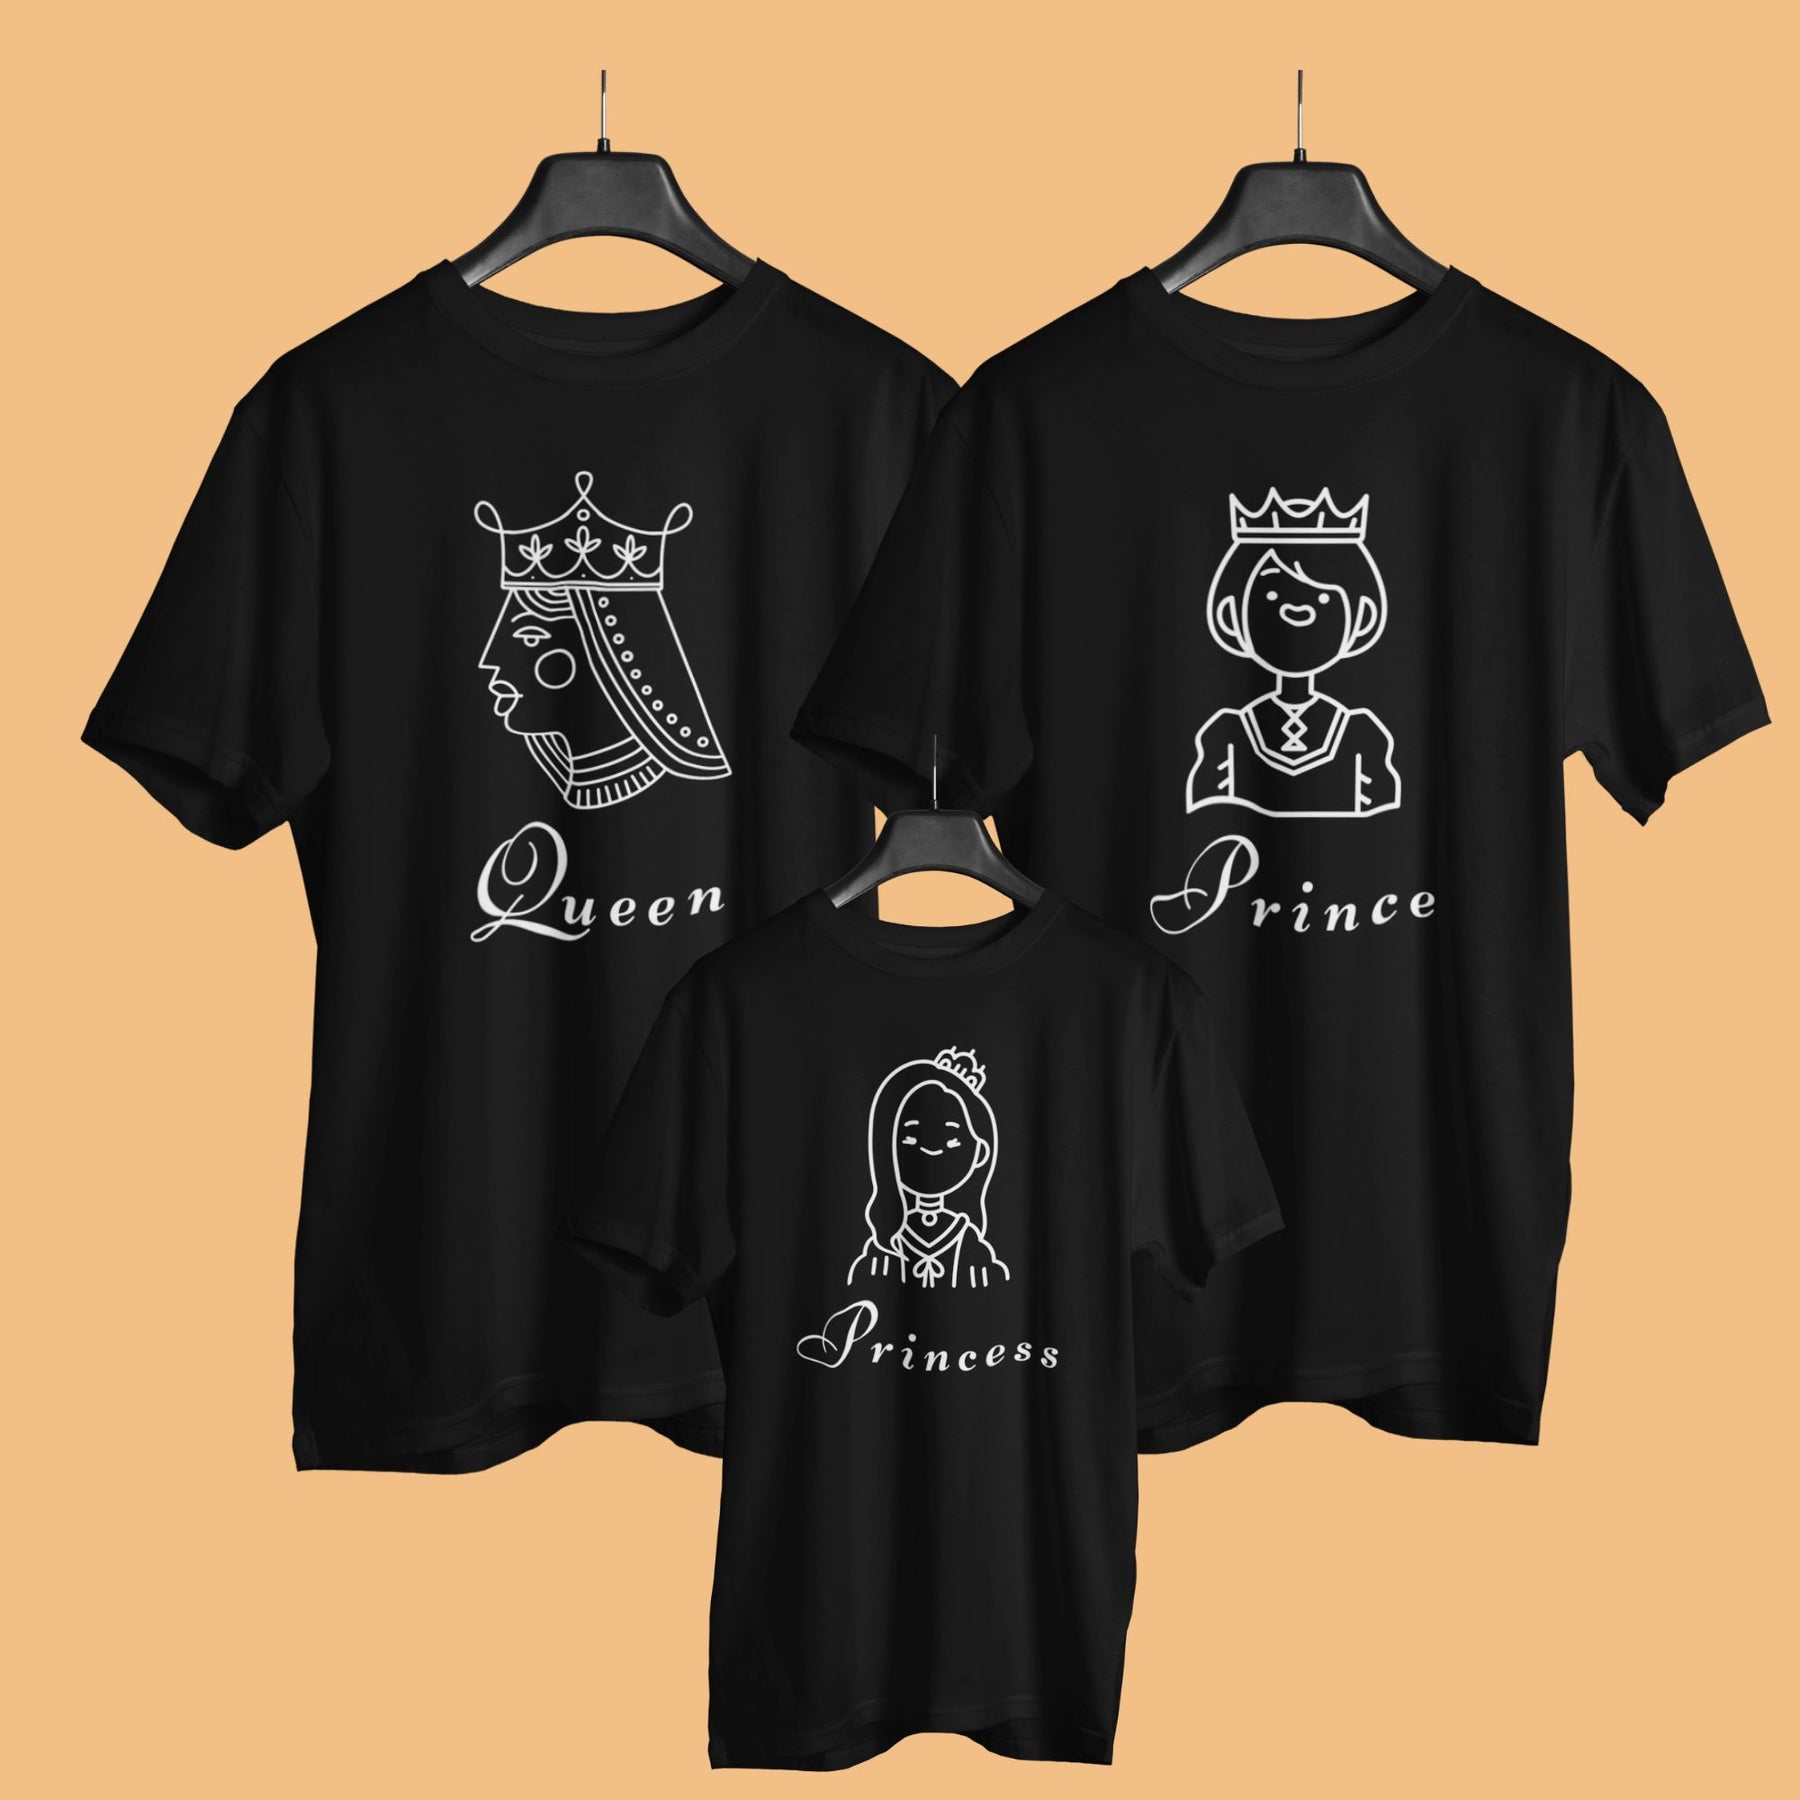 queen-prince-princess-matching-family-black-t-shirts-for-mom-dad-daughter-gogirgit-hanger